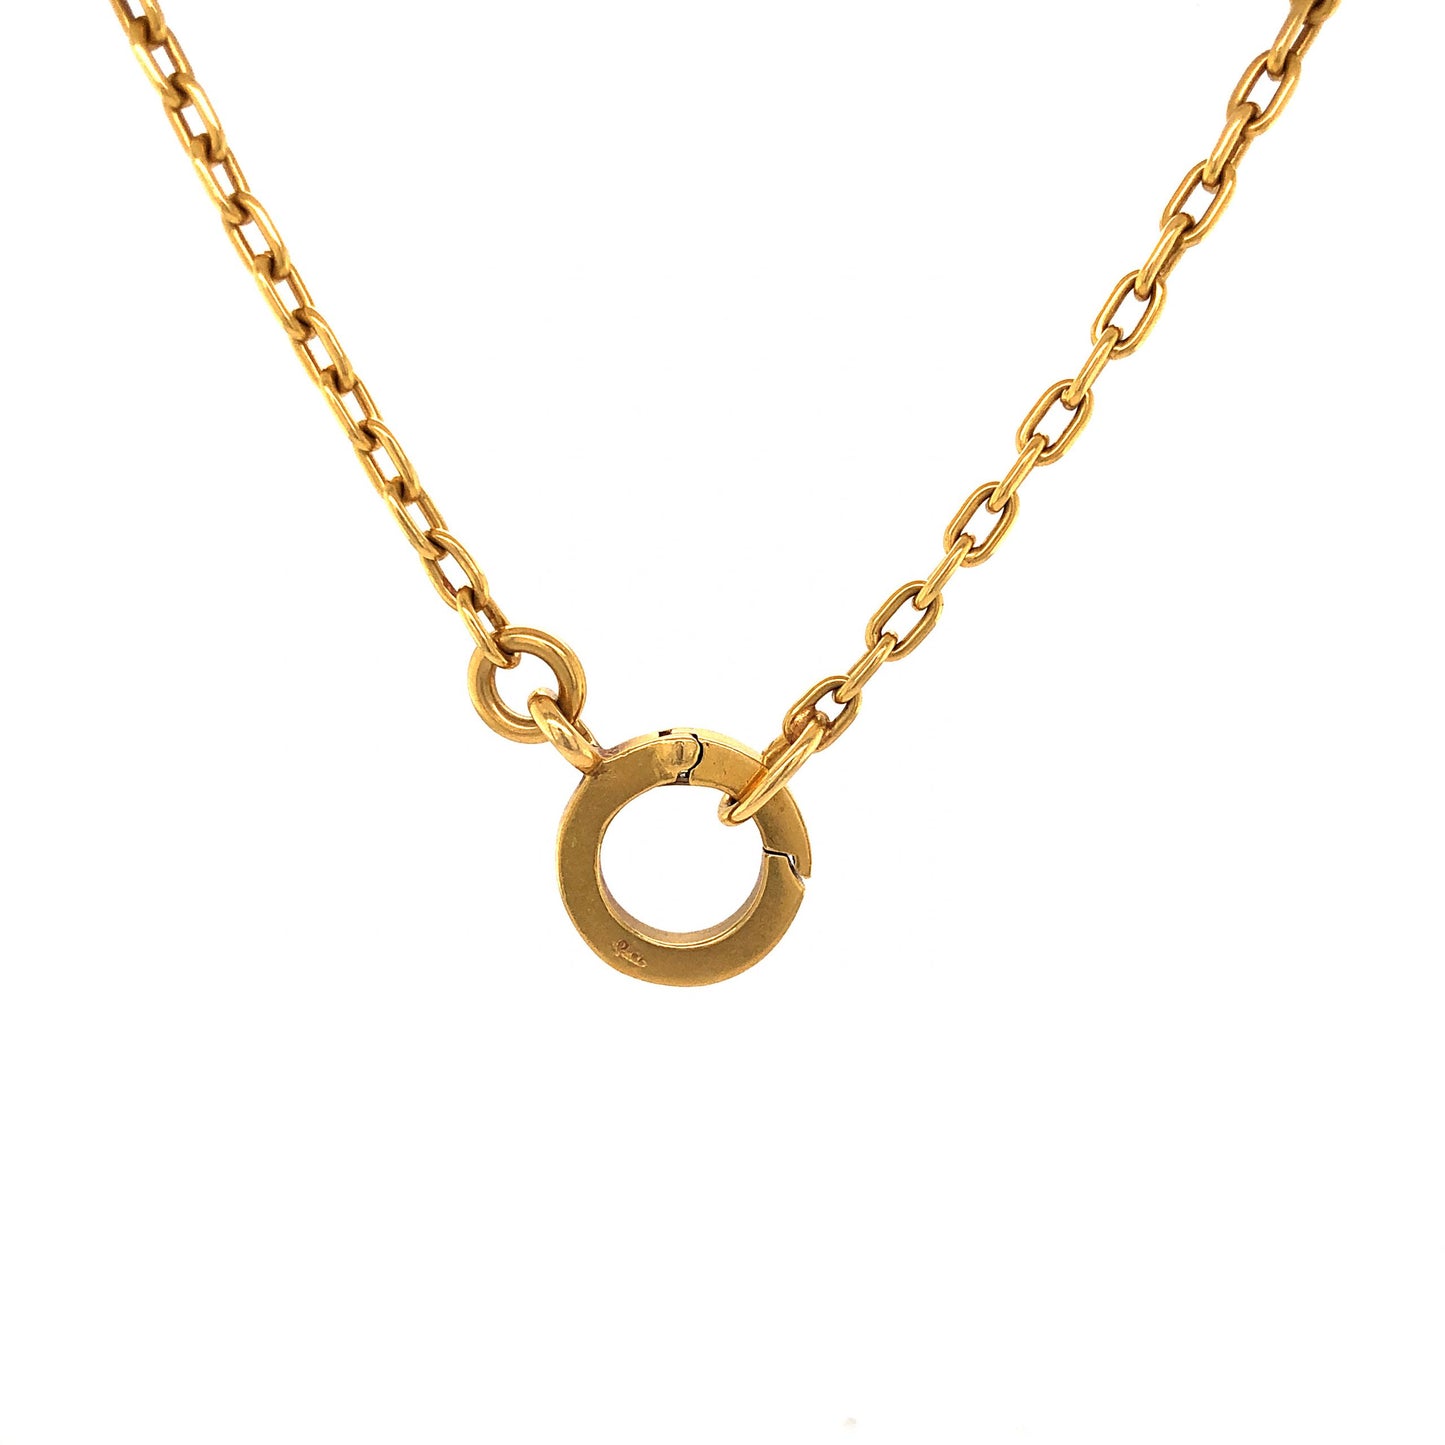 30 Inch Victorian Chain Necklace in 18k Yellow Gold